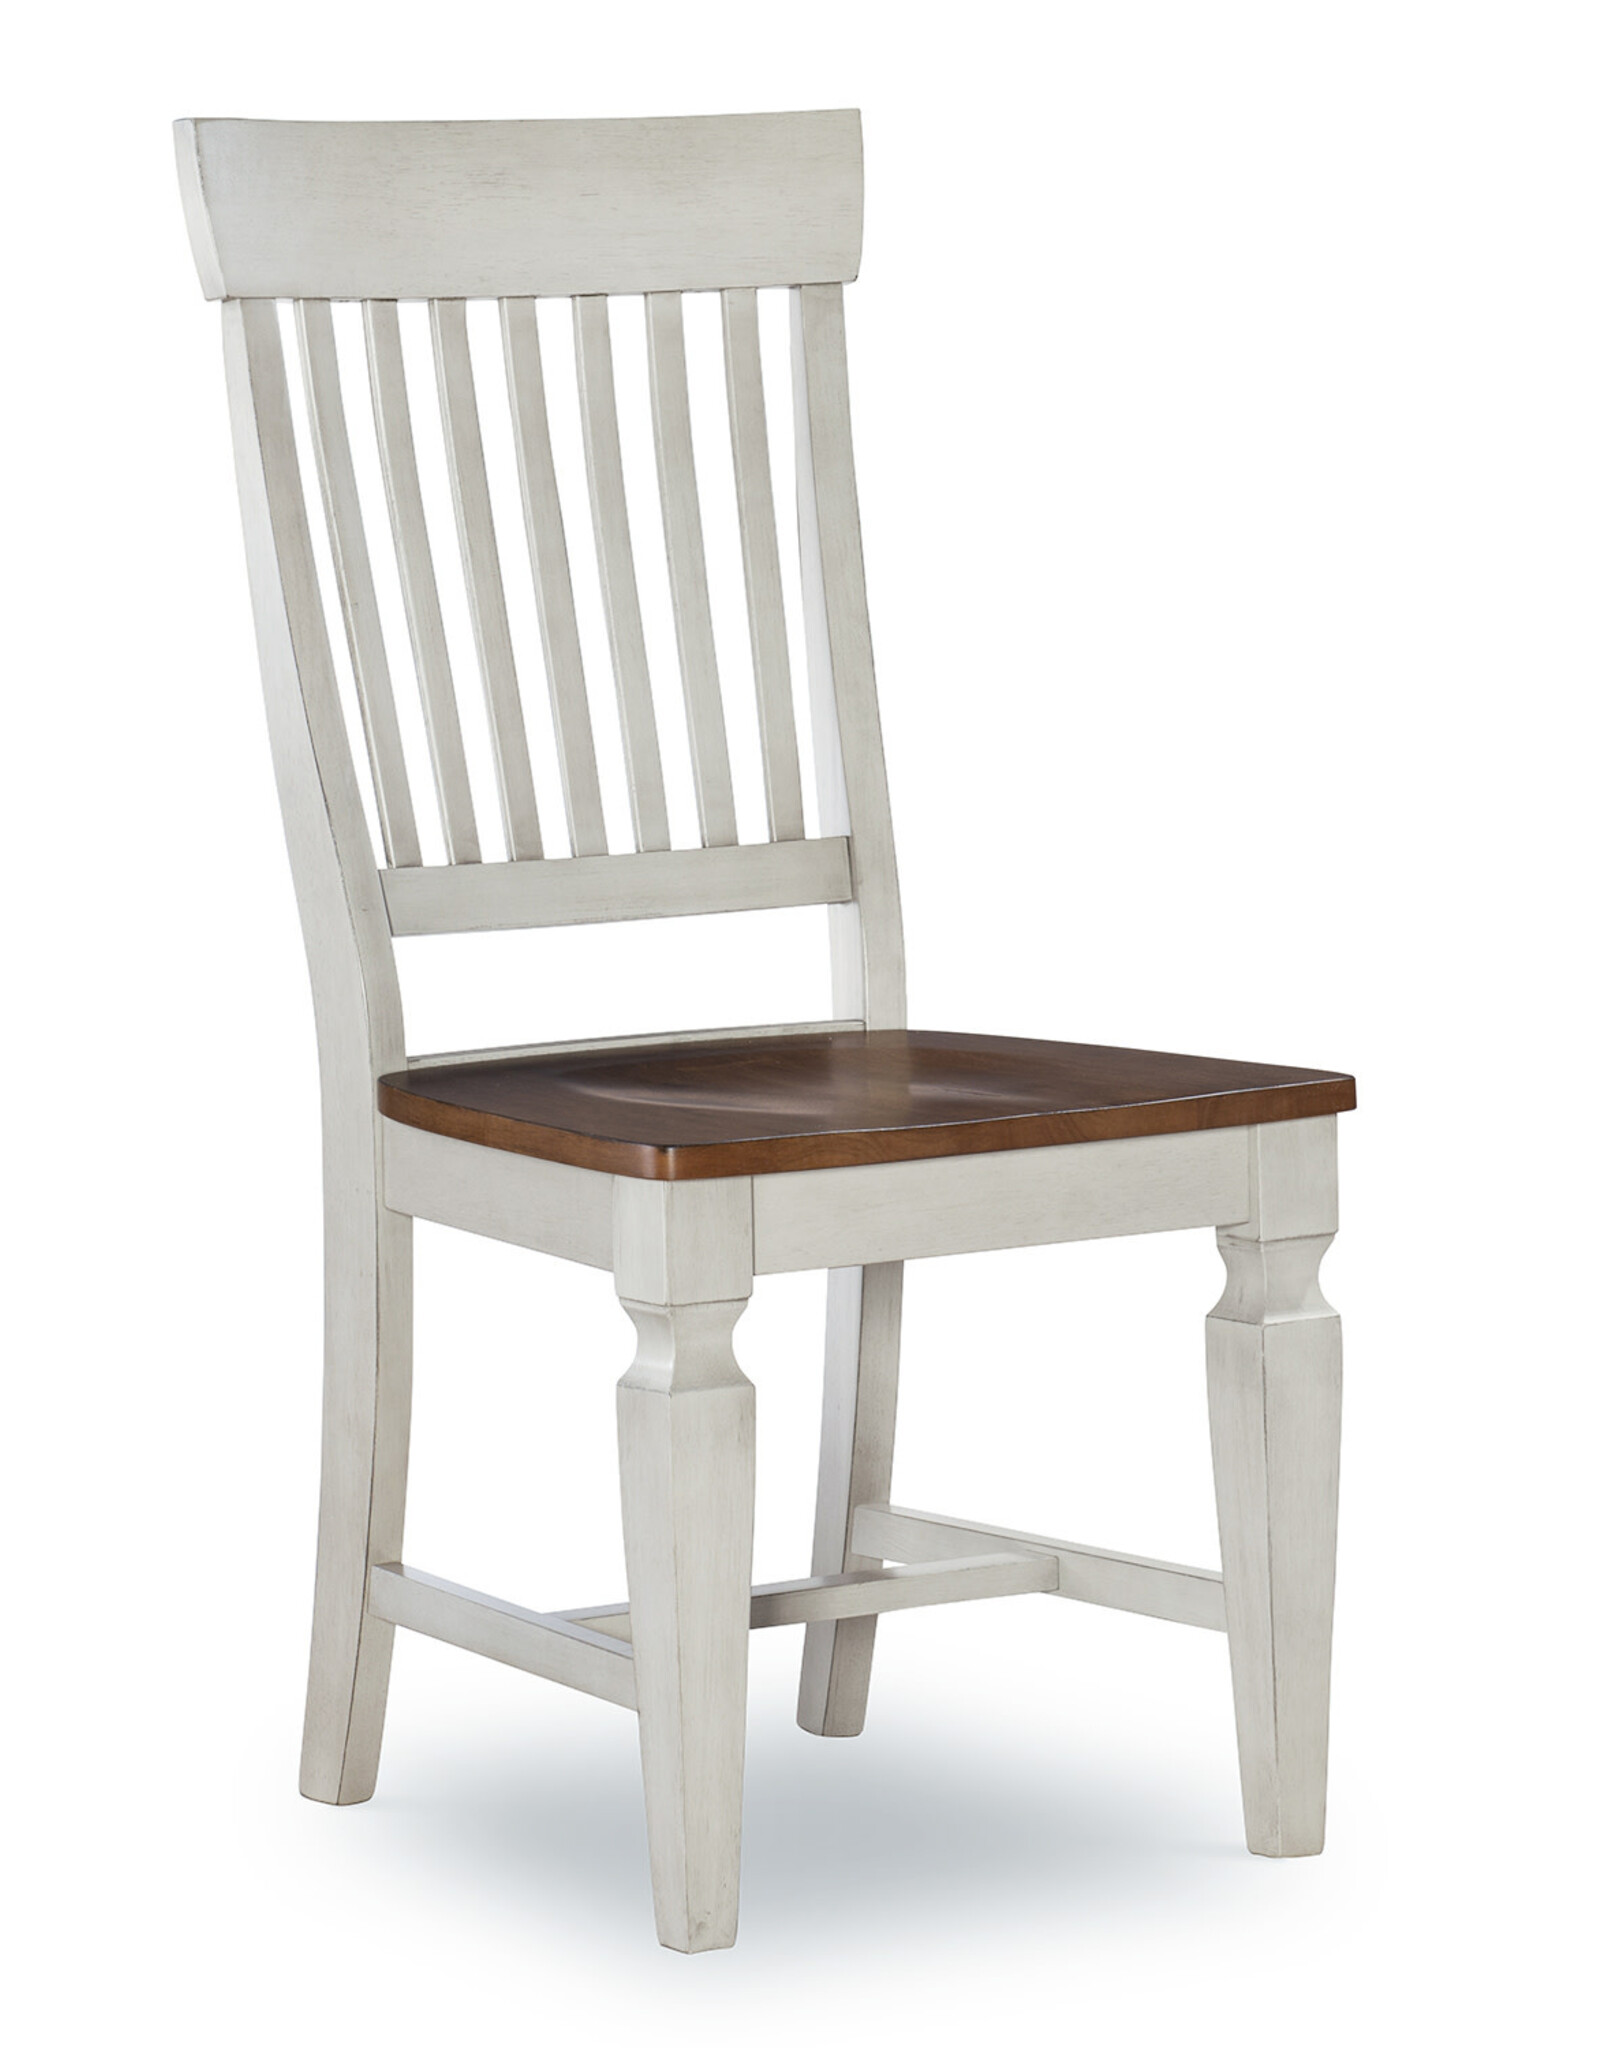 Whitewood Vista Dining Chair